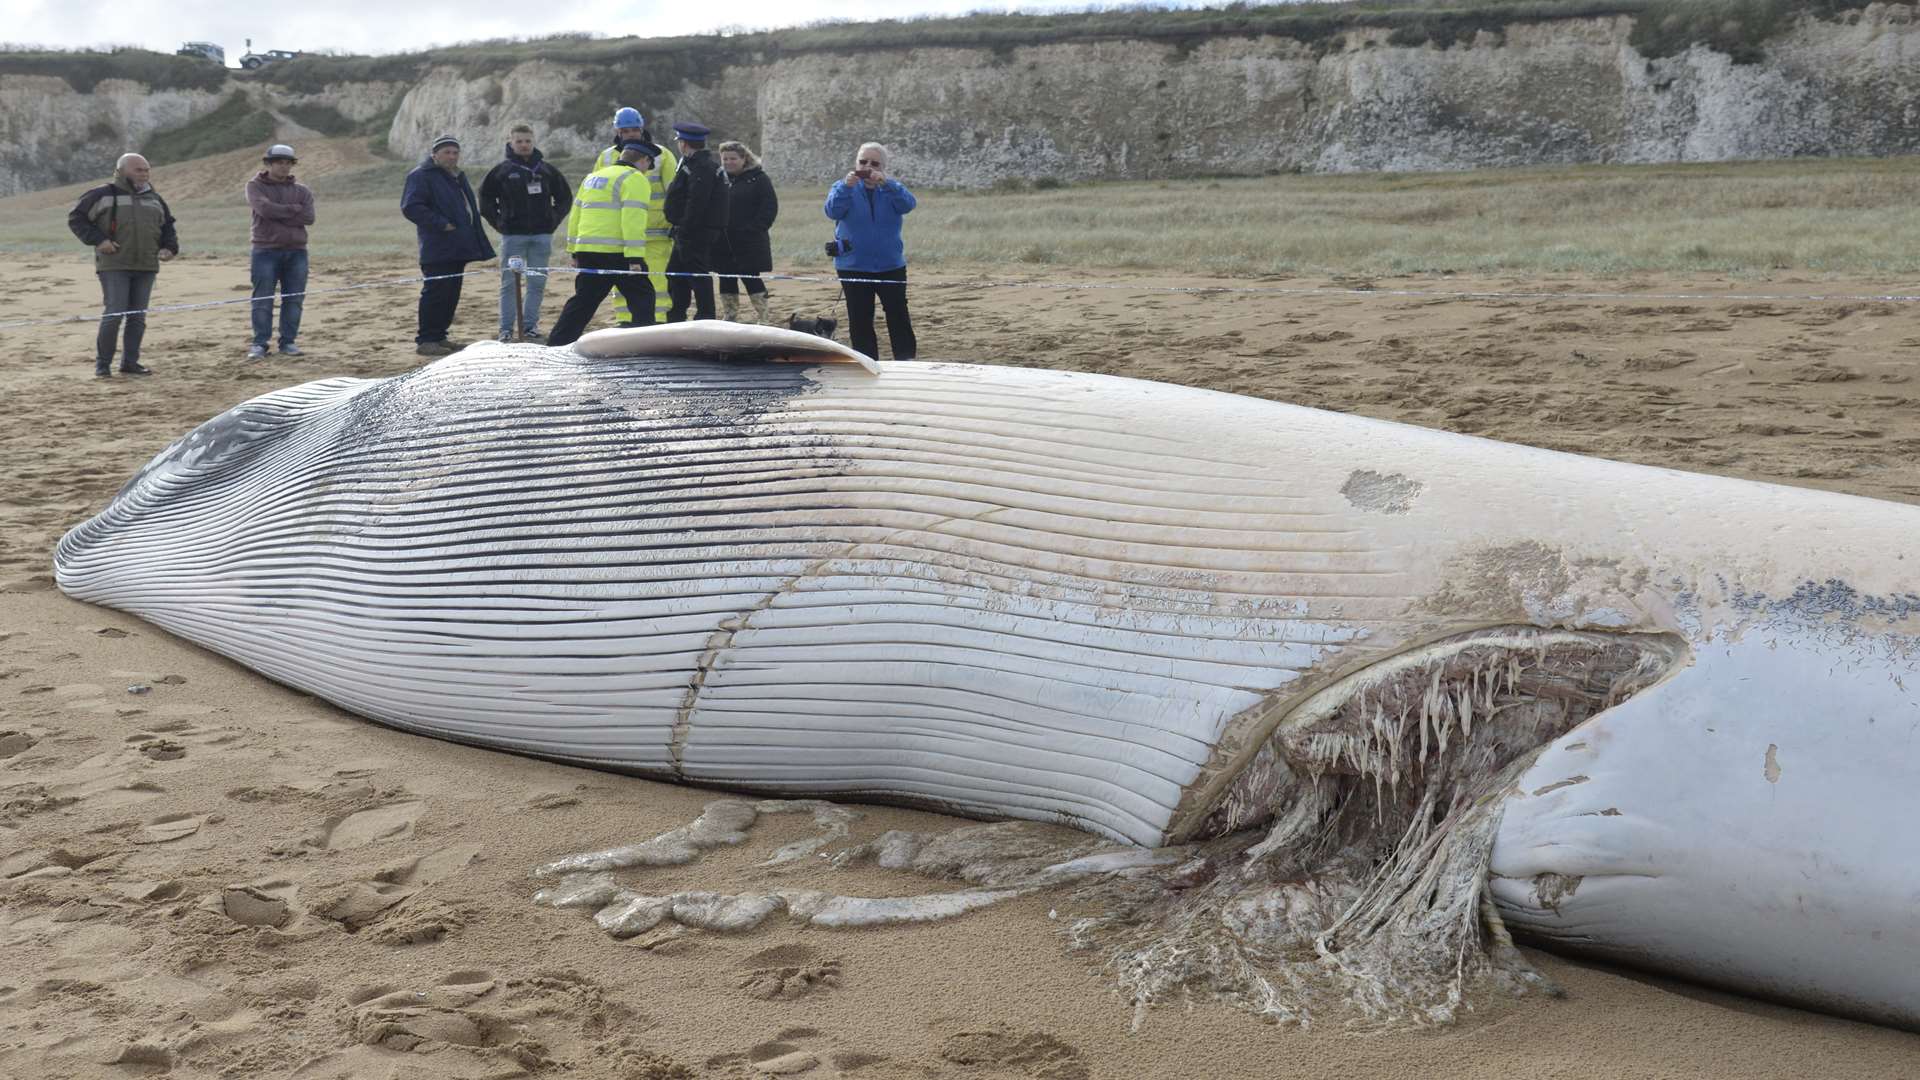 A crowd gathered to see the dead whale.